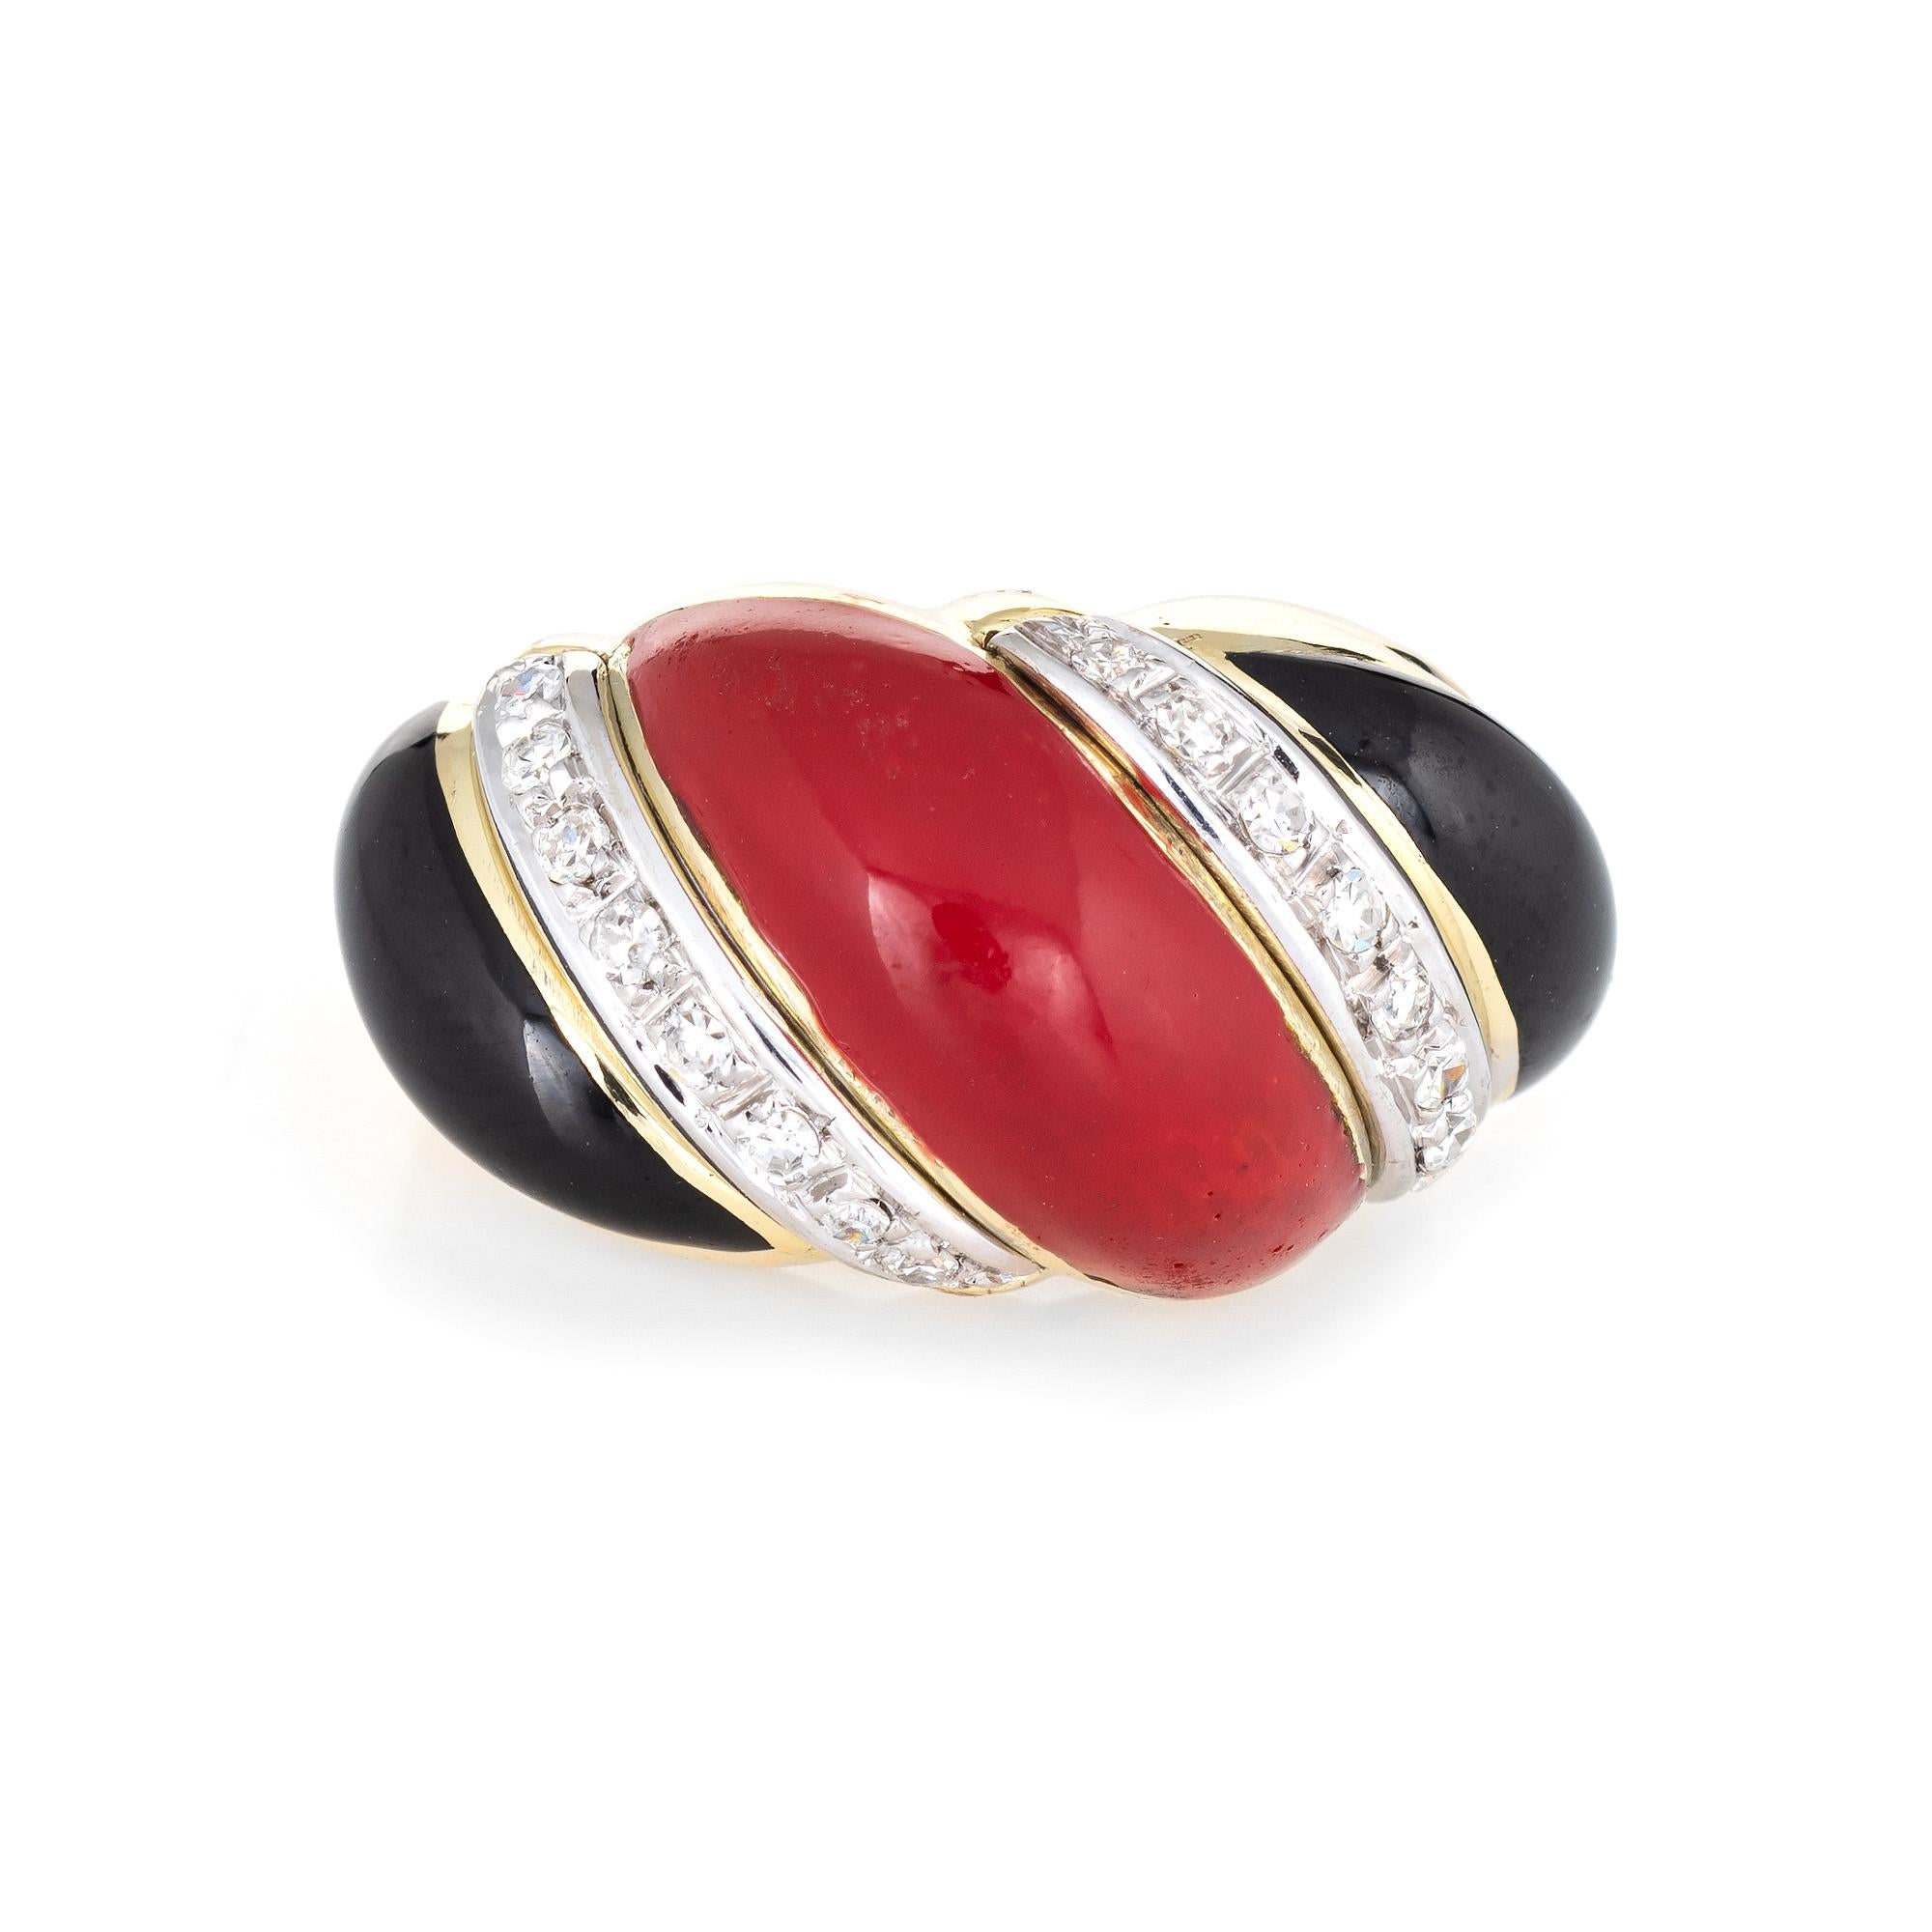 Stylish vintage Sardinian red coral, onyx & diamond cocktail ring (circa 1960s to 1970s) crafted in 18 karat yellow gold. 

Coral & onyx measures 20mm x 6mm (center coral) and 15mm x 4mm (outer onyx). The diamonds total an estimated 0.16 carats